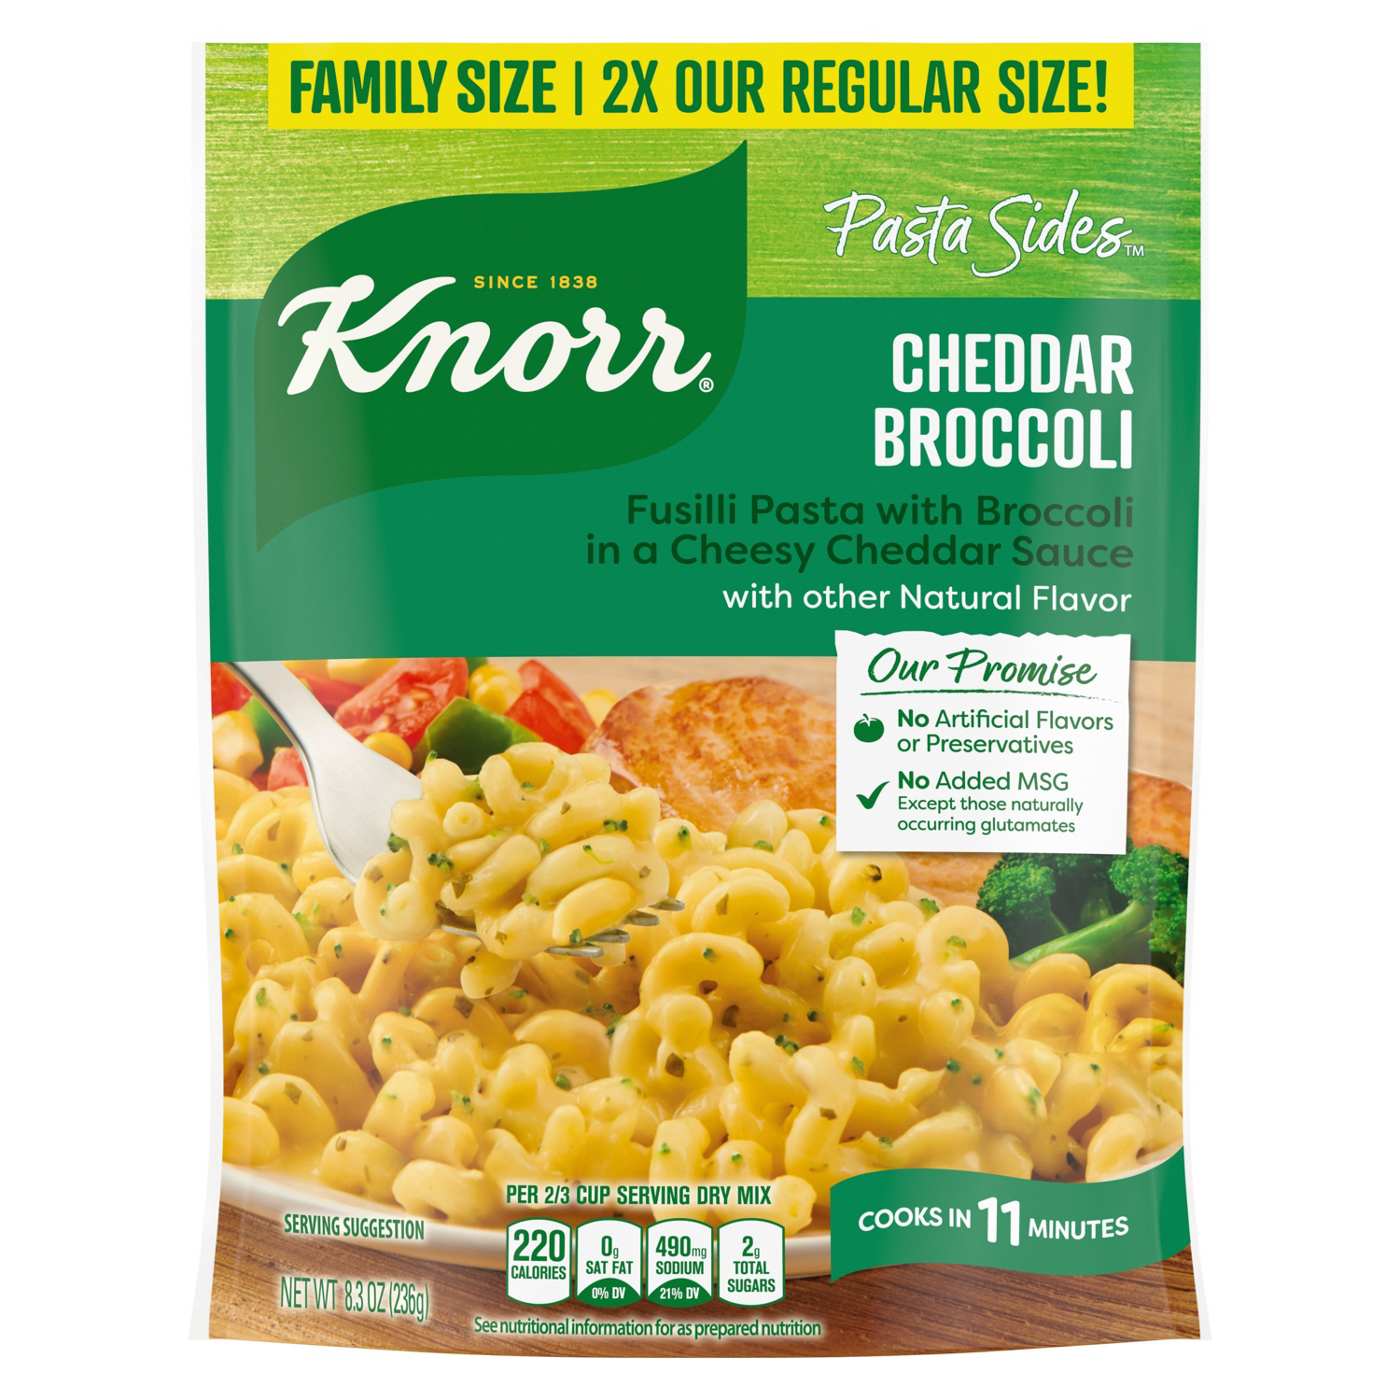 Knorr Pasta Sides Cheddar Broccoli Family Size; image 1 of 3